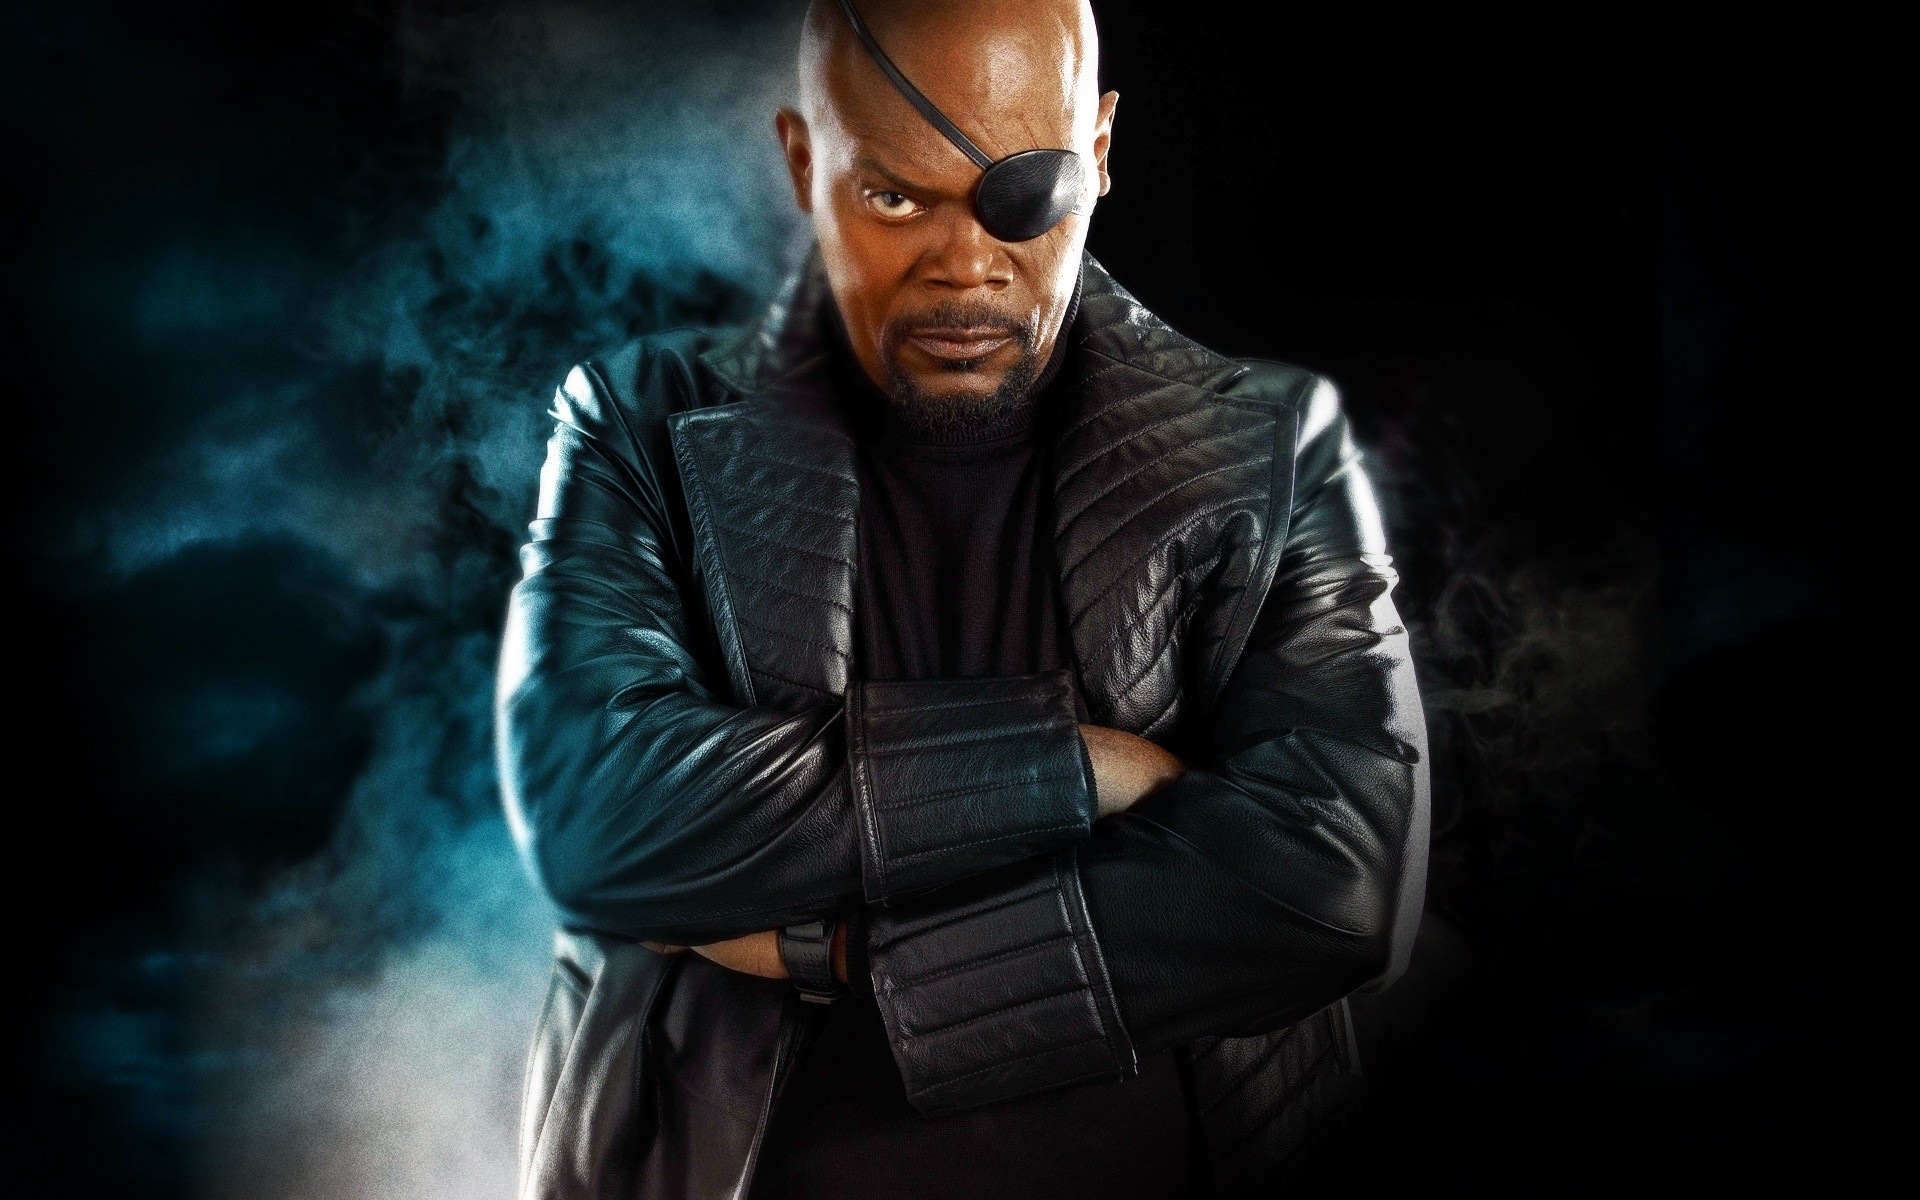 Wallpaper, eyepatches, arms crossed, Marvel Cinematic Universe, Samuel L Jackson, Captain America The Winter Soldier, Nick Fury, angry, arms on chest, darkness, screenshot, computer wallpaper, action film 1920x1200